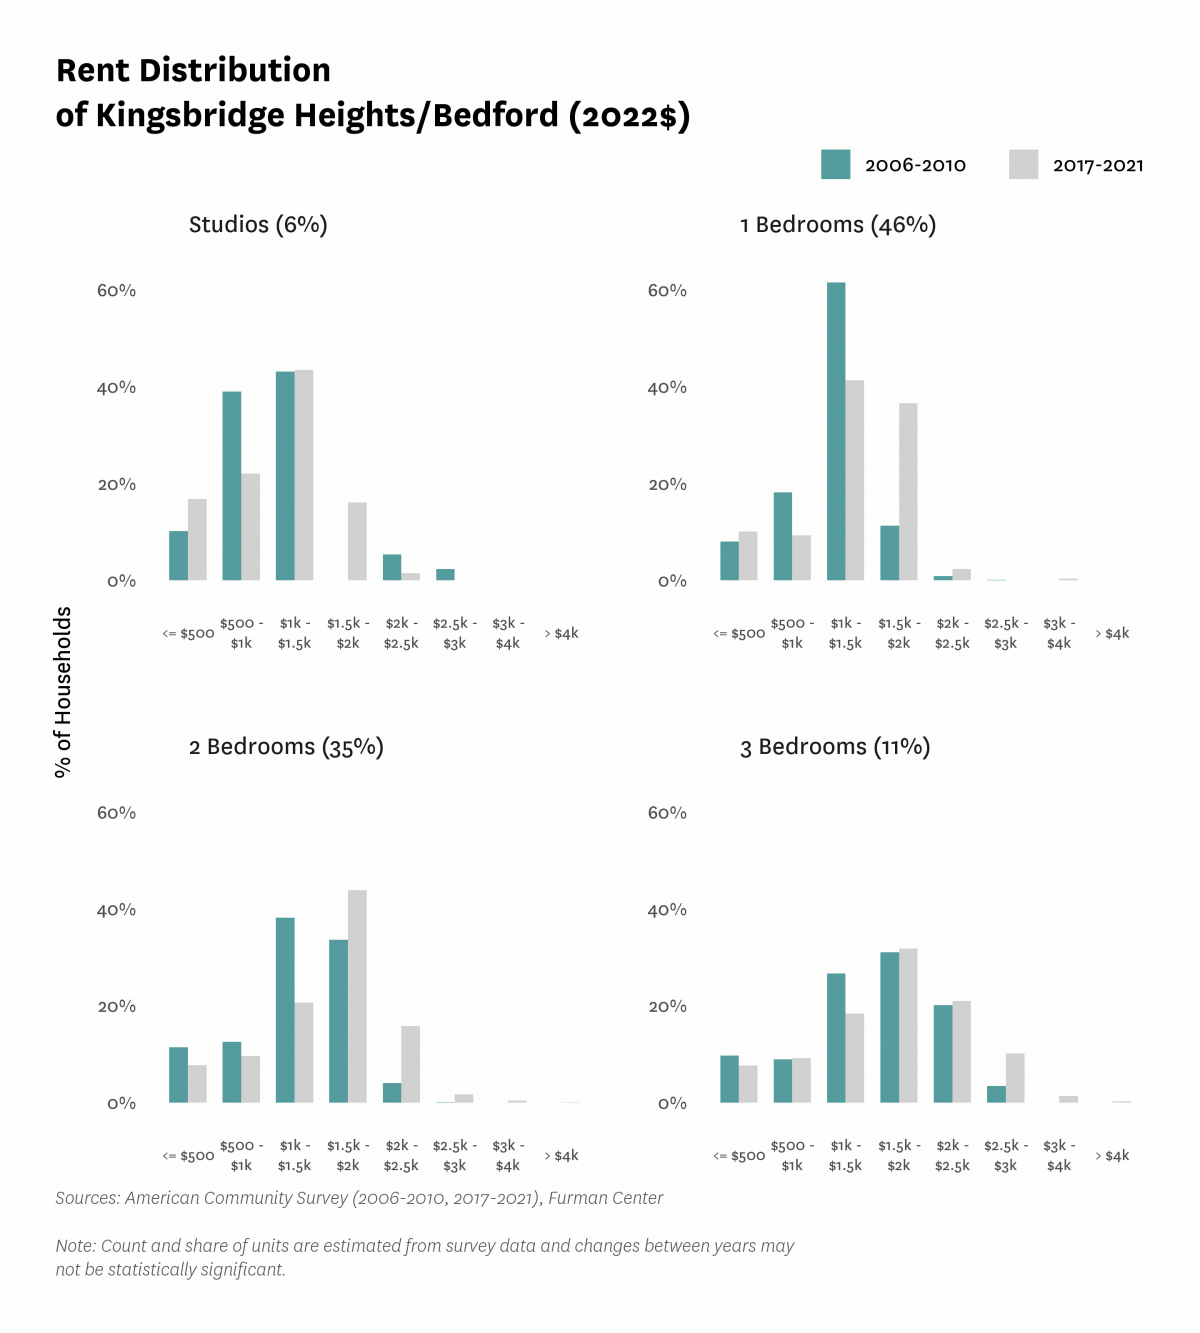 Graph showing the distribution of rents in Kingsbridge Heights/Bedford in both 2010 and 2017-2021.